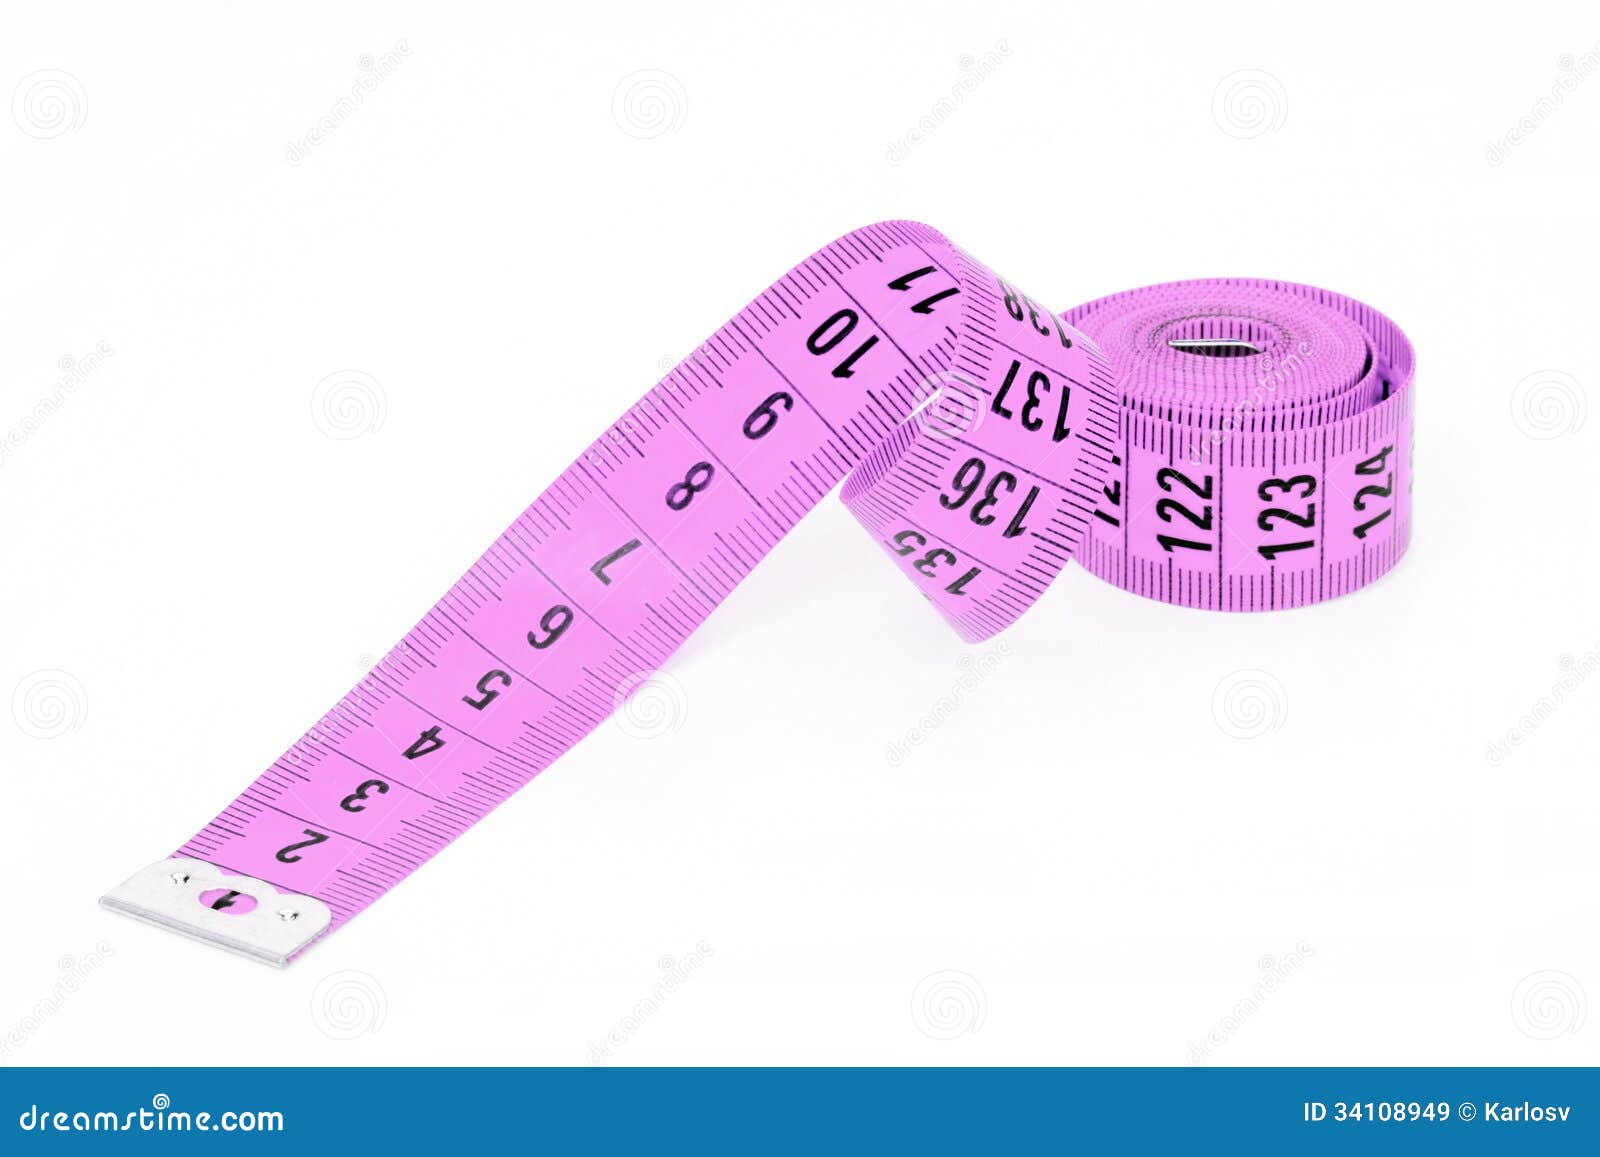 Sewing measuring tape stock image. Image of inch, measuredtape - 34108949